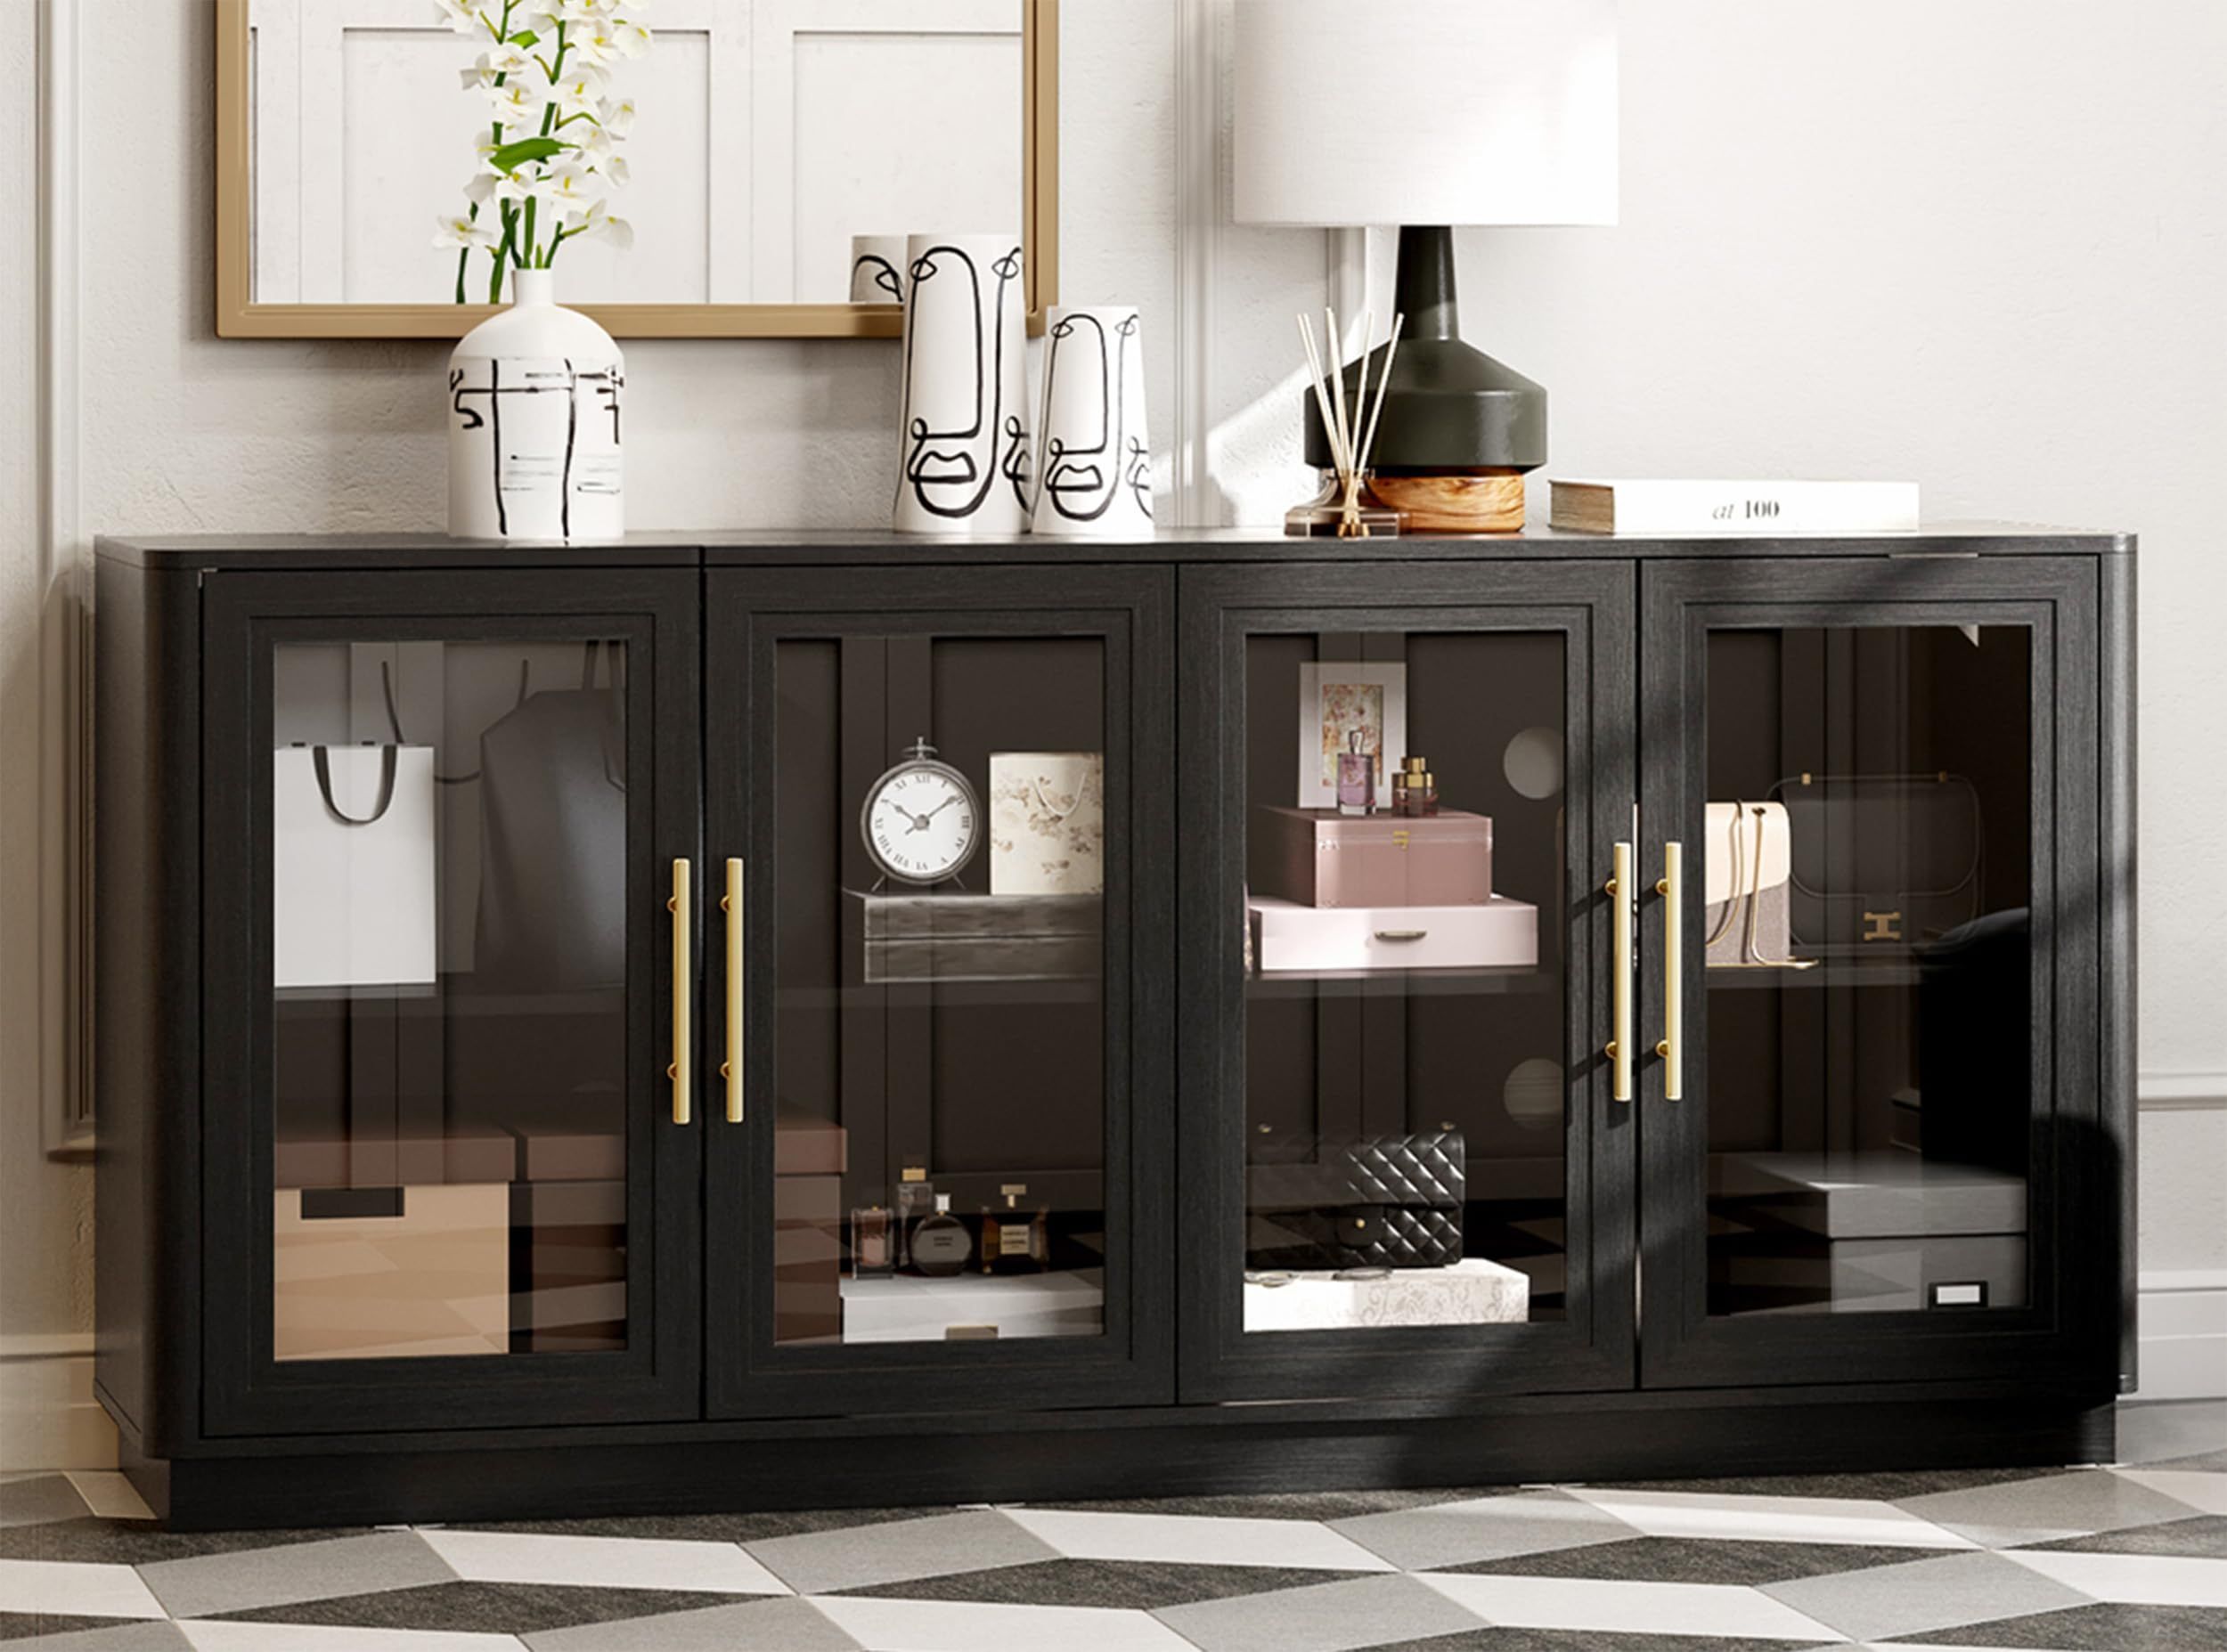 Elegant Glass Door Sideboards: A Stylish Addition to Your Dining Room